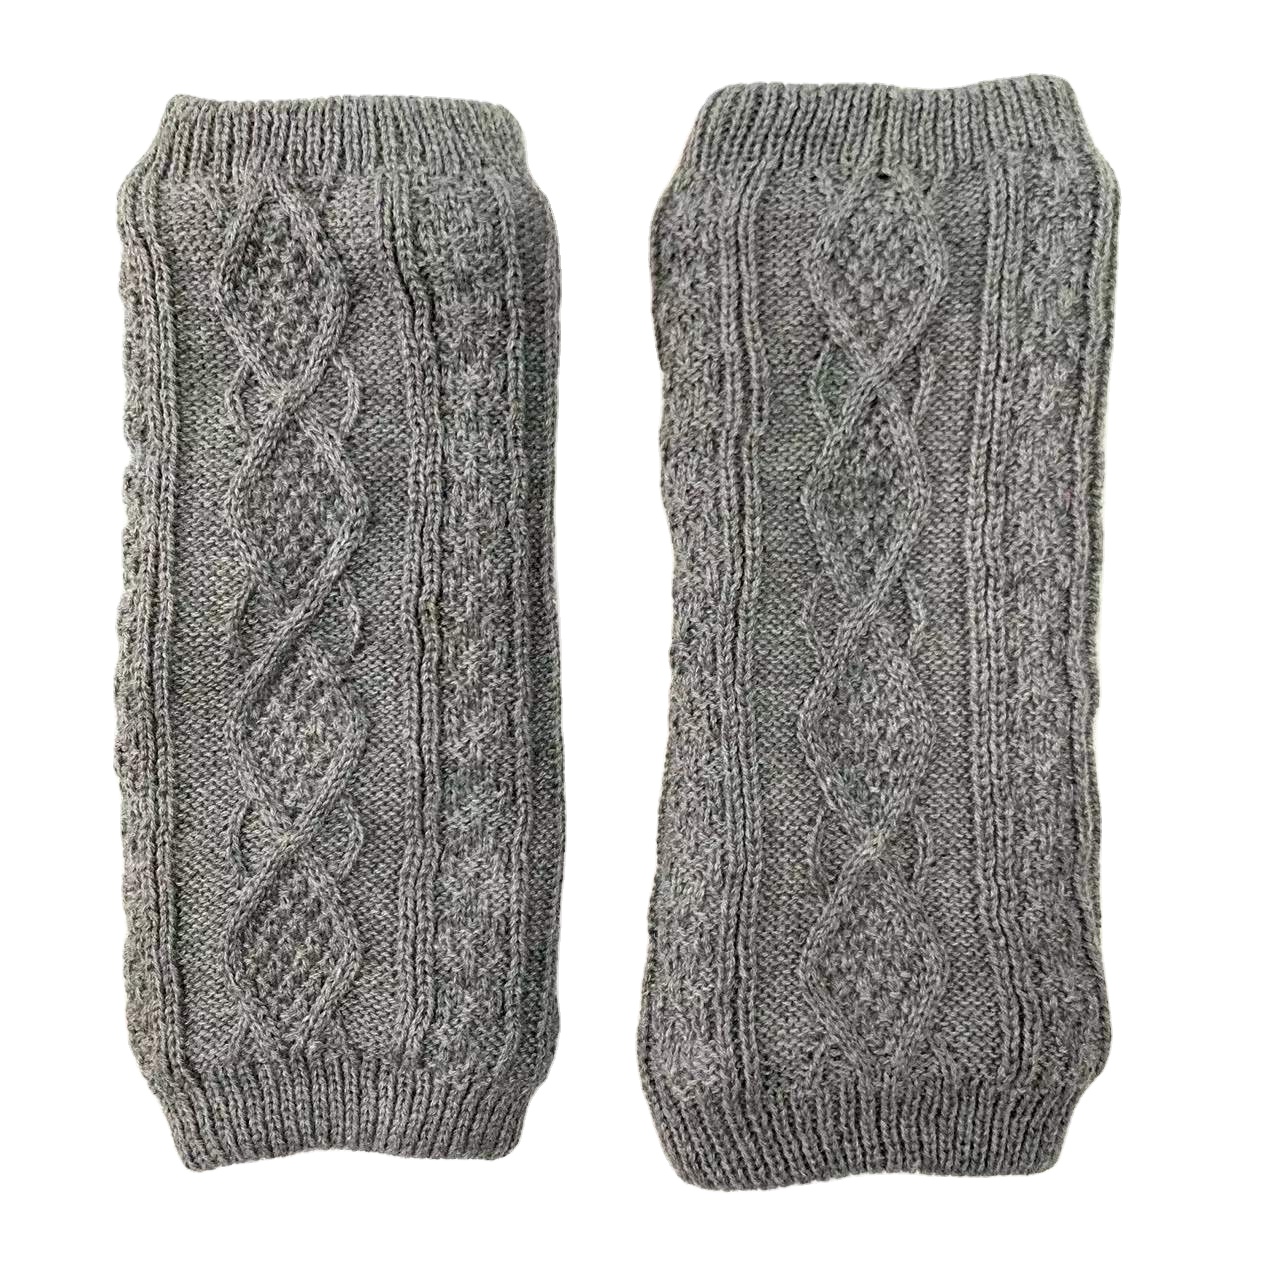 Wholesale wool leg warmers In The Latest Fashionable Prints